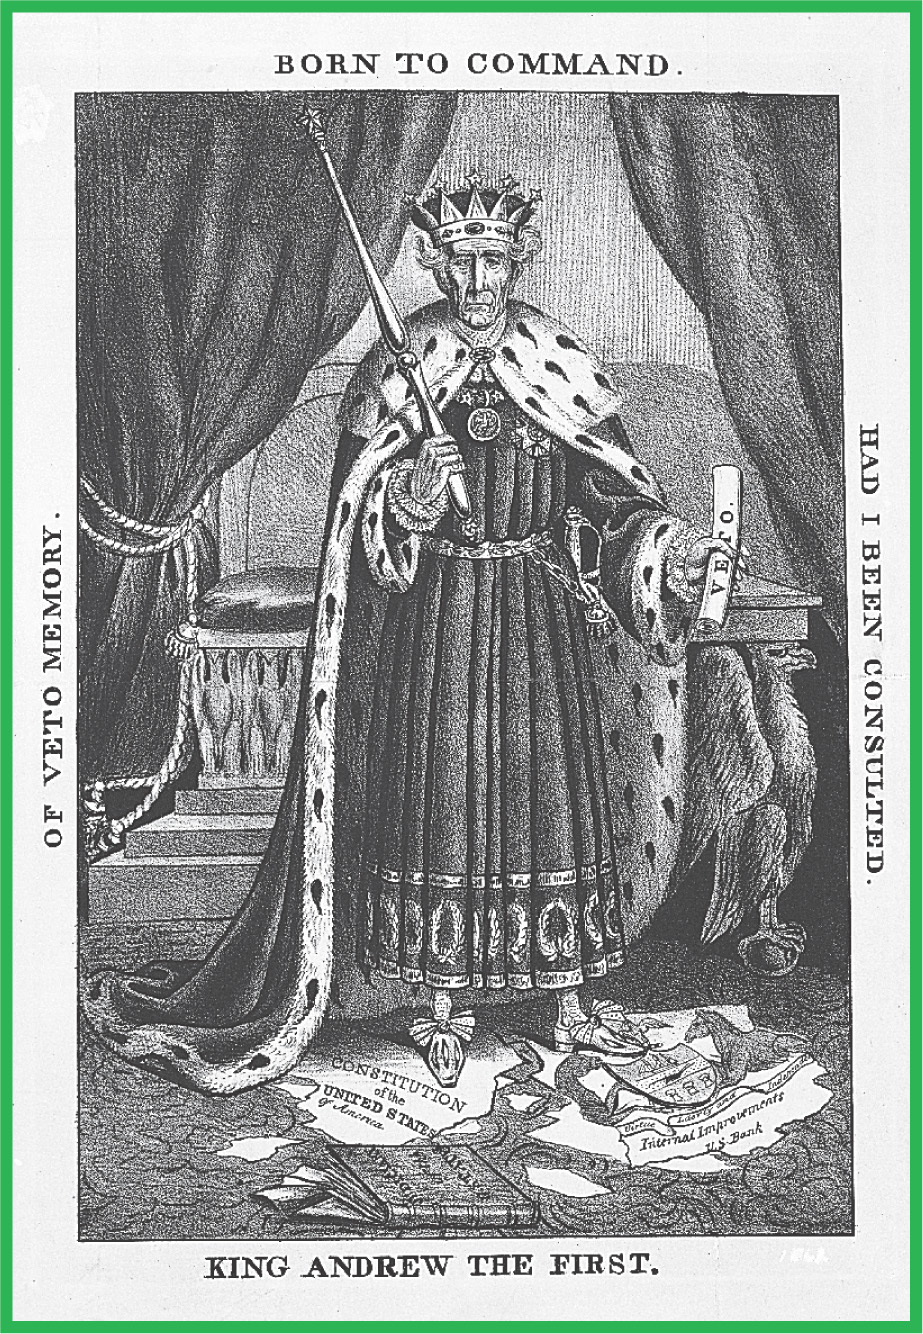 A political cartoon shows Andrew Jackson wearing a crown and
royal robes while holding a scepter. The cartoon is captioned King Andrew The First, of veto memory.
Born to command, had I been consulted.